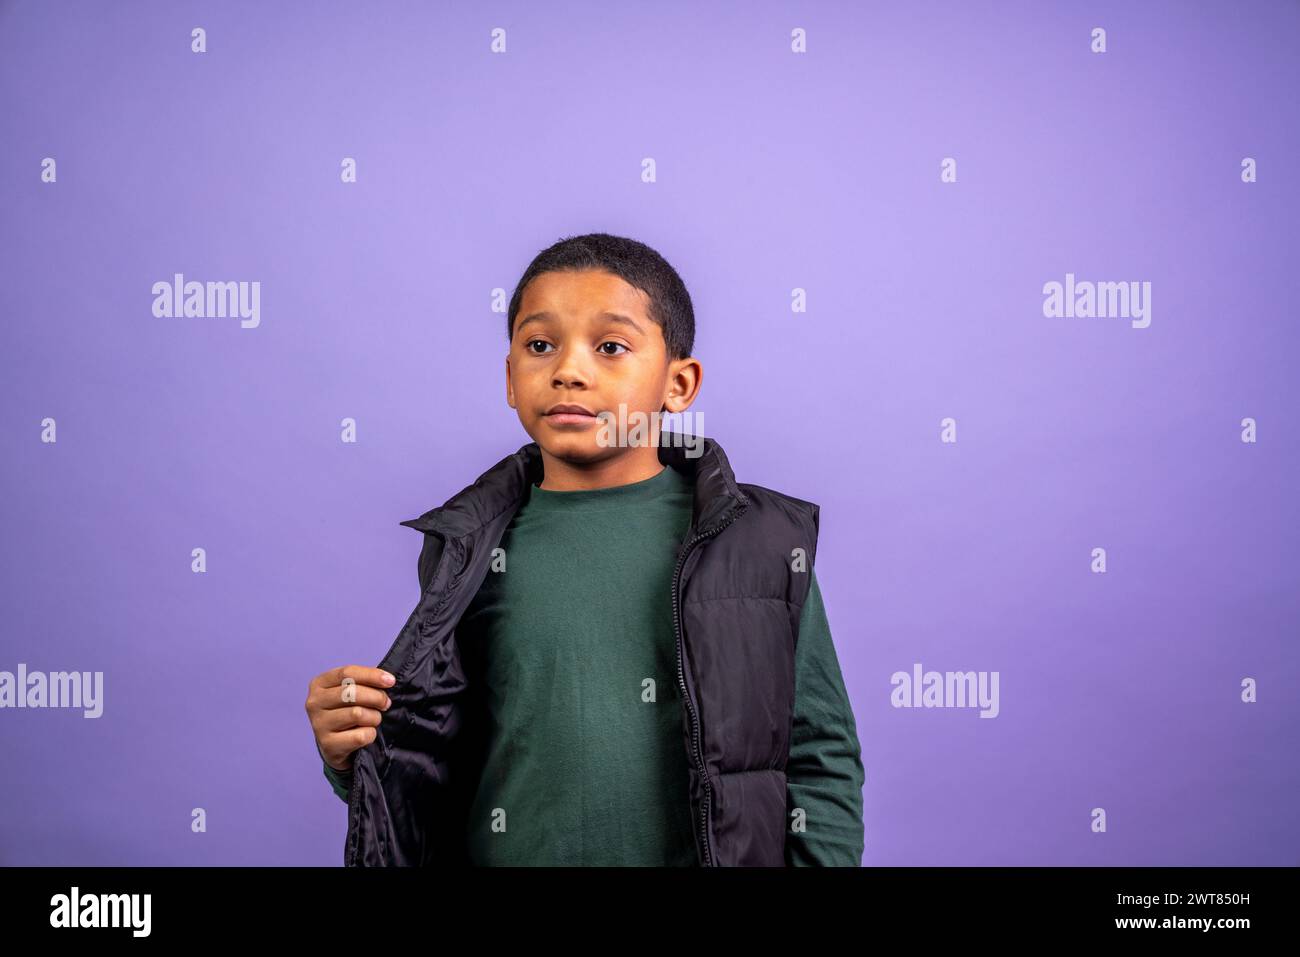 A young boy wearing a green shirt and black vest stands in front of a purple background. He looks serious and focused Stock Photo